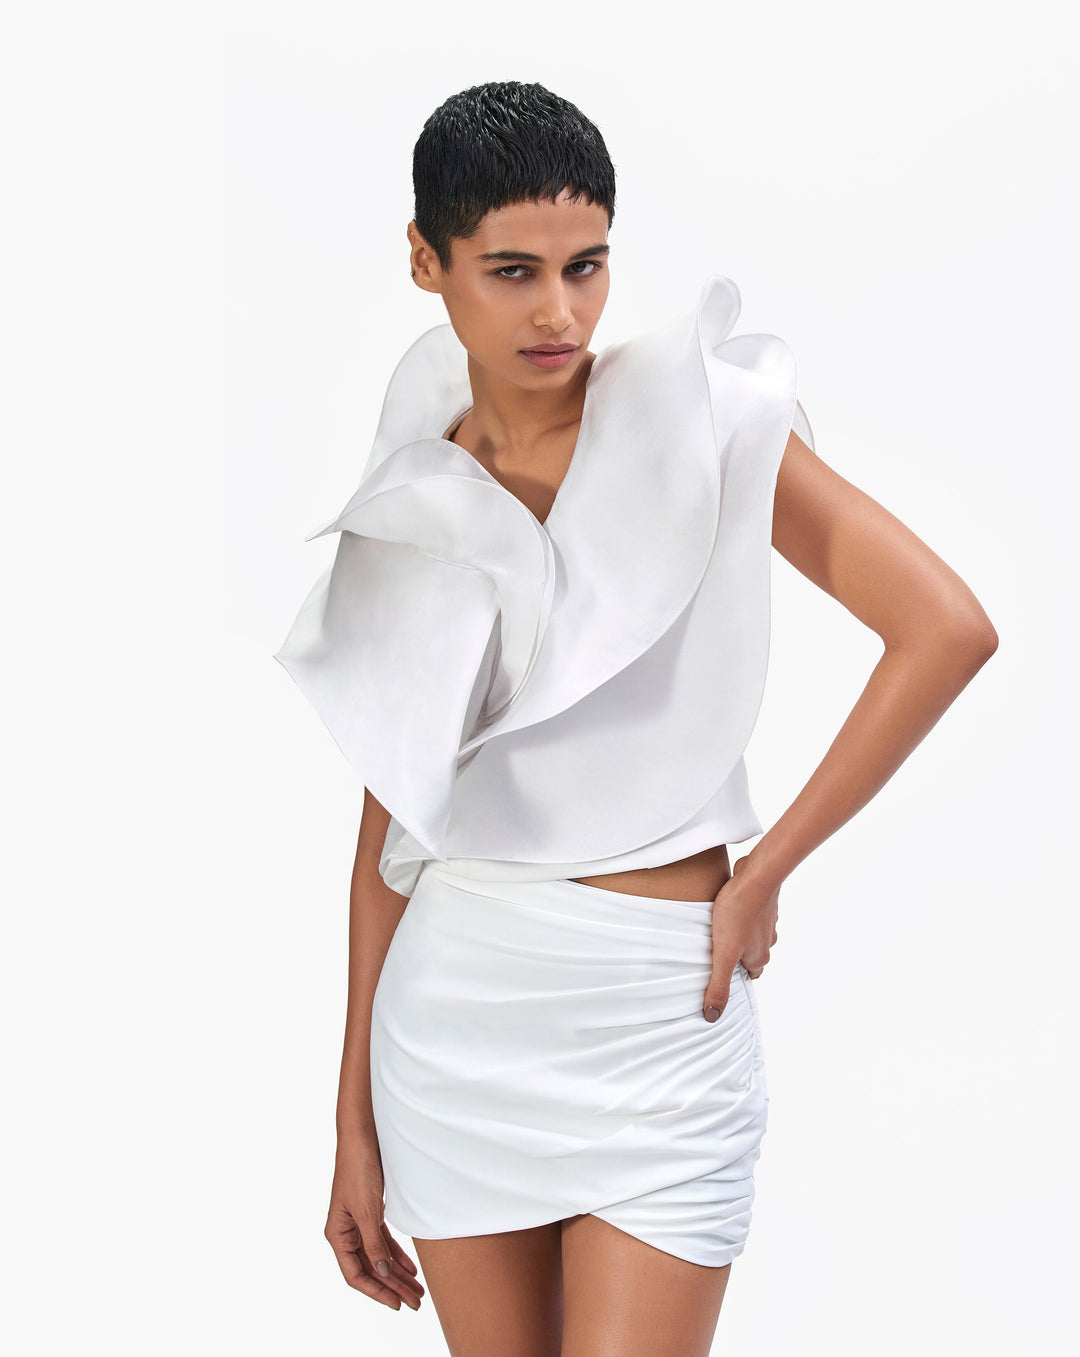 The Deconstructed Ruffle Top